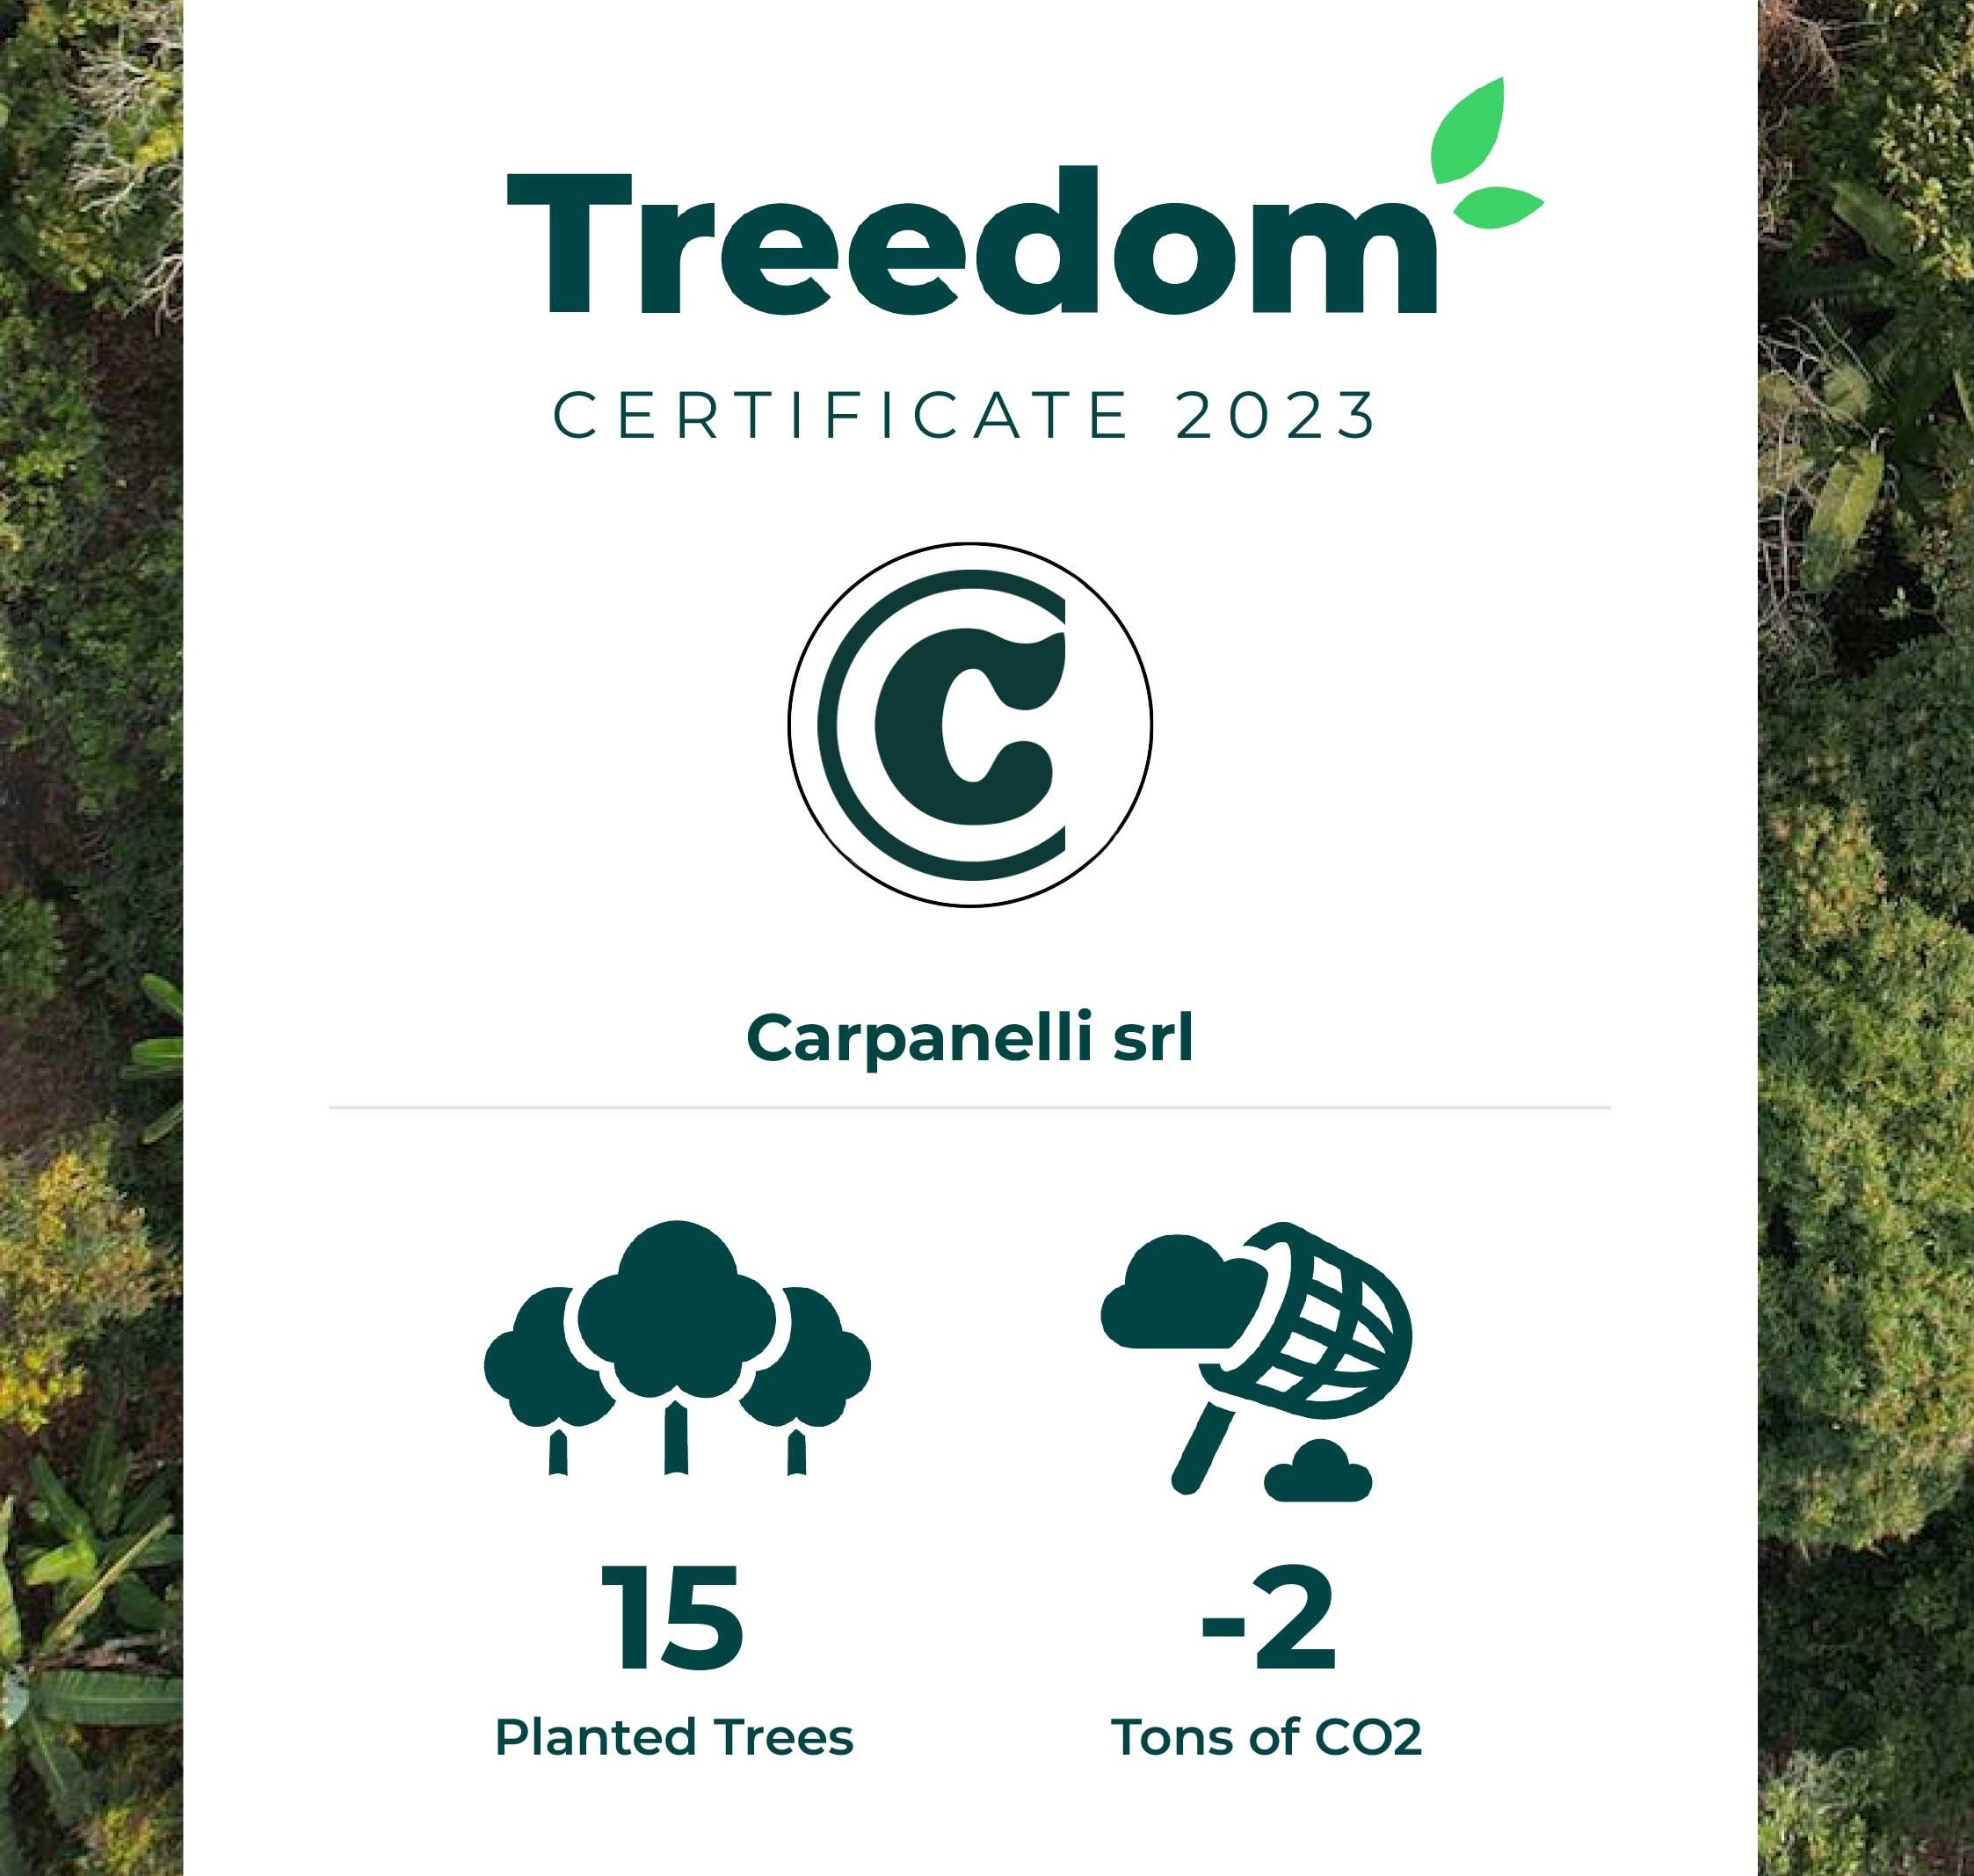 The collaboration with Treedom begins, a company that allows trees to be planted all over the world and preserve the planet